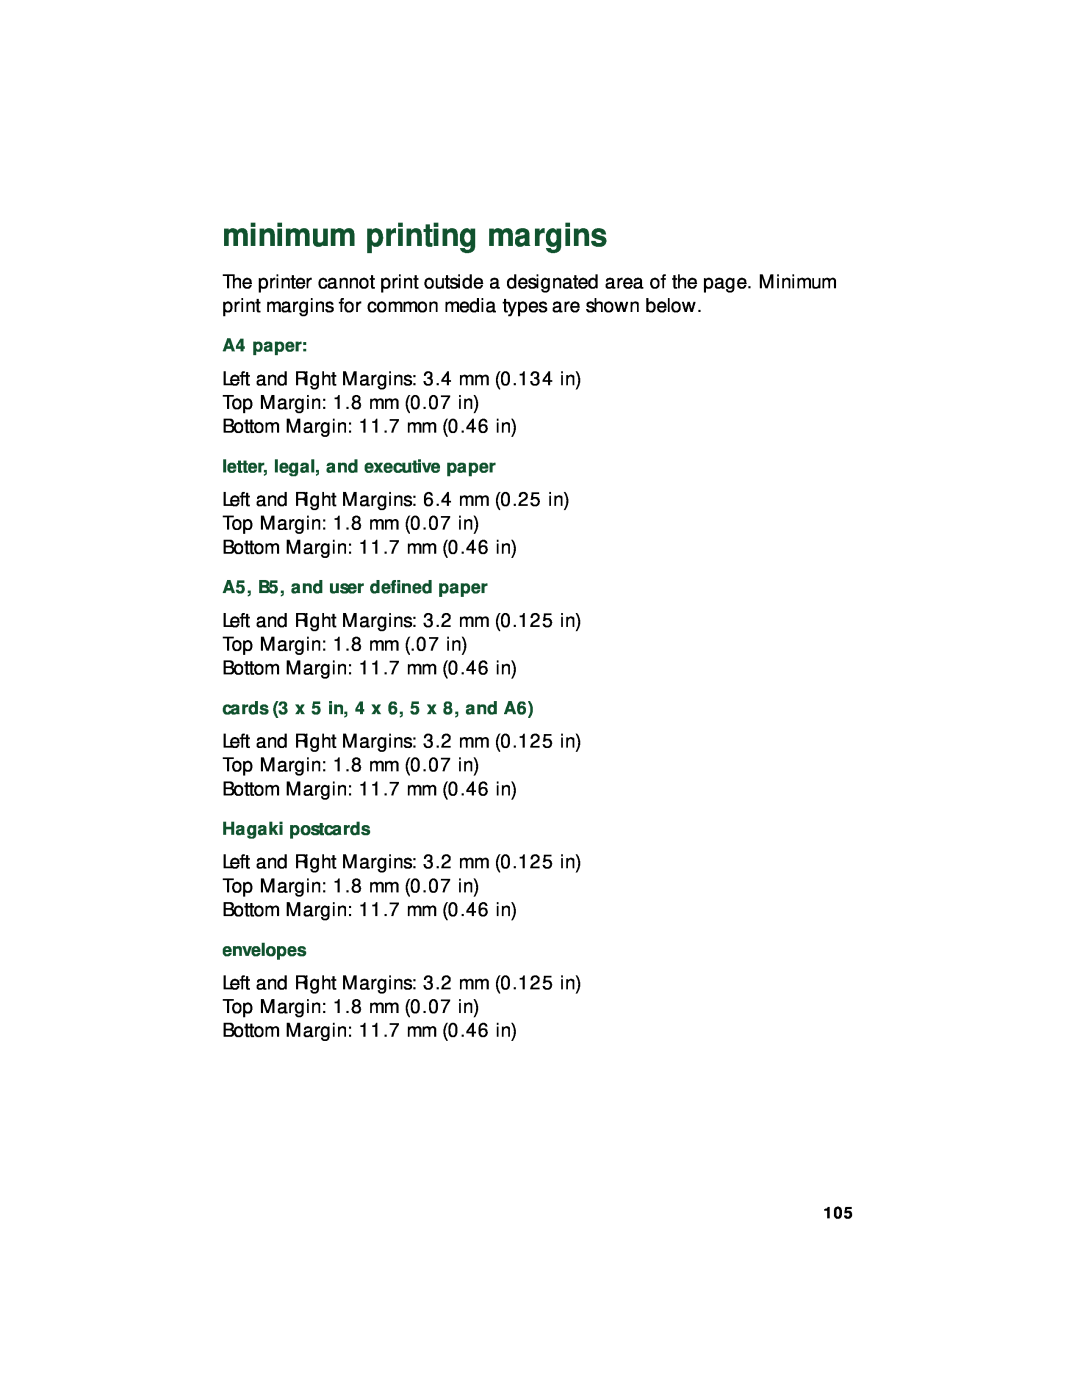 HP 940c minimum printing margins, A4 paper, letter, legal, and executive paper, A5, B5, and user defined paper, envelopes 